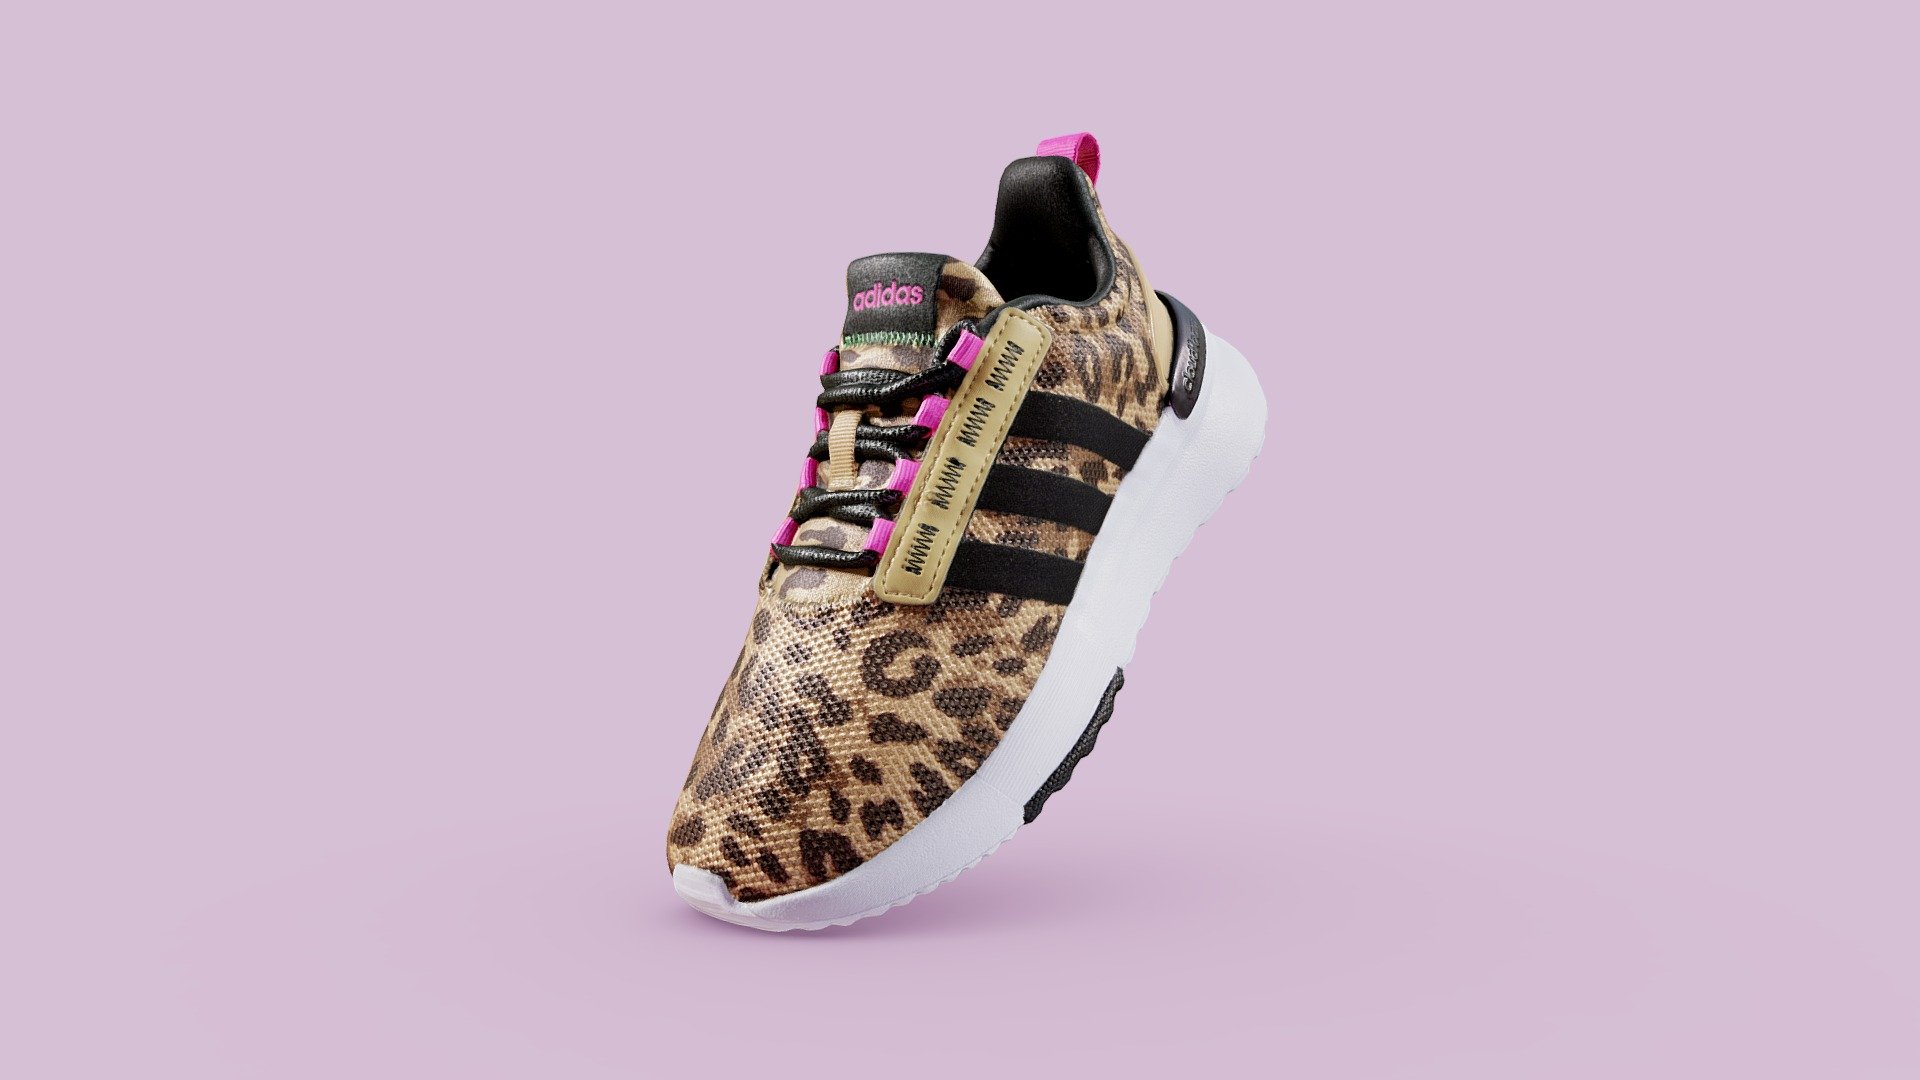 Adidas Leopard Shoe 

Add the comfort and athletic style of a running shoe to your child’s daily routine. These kids’ adidas shoes keep them going on all-day adventures with a sleek, lightweight feel, thanks to the flexible textile upper.

23.5 x 9.6 x 11.3 cm (85 micrometers per texel @ 4k)

Scanned using advanced technology developed by inciprocal Inc. that enables highly photo-realistic reproduction of real-world products in virtual environments. Our hardware and software technology combines advanced photometry, structured light, photogrammtery and light fields to capture and generate accurate material representations from tens of thousands of images targeting real-time and offline path-traced PBR compatible renderers.

Zip file includes low-poly OBJ mesh (in meters) with a set of 4k PBR textures compressed with lossless JPEG (no chroma sub-sampling) 3d model